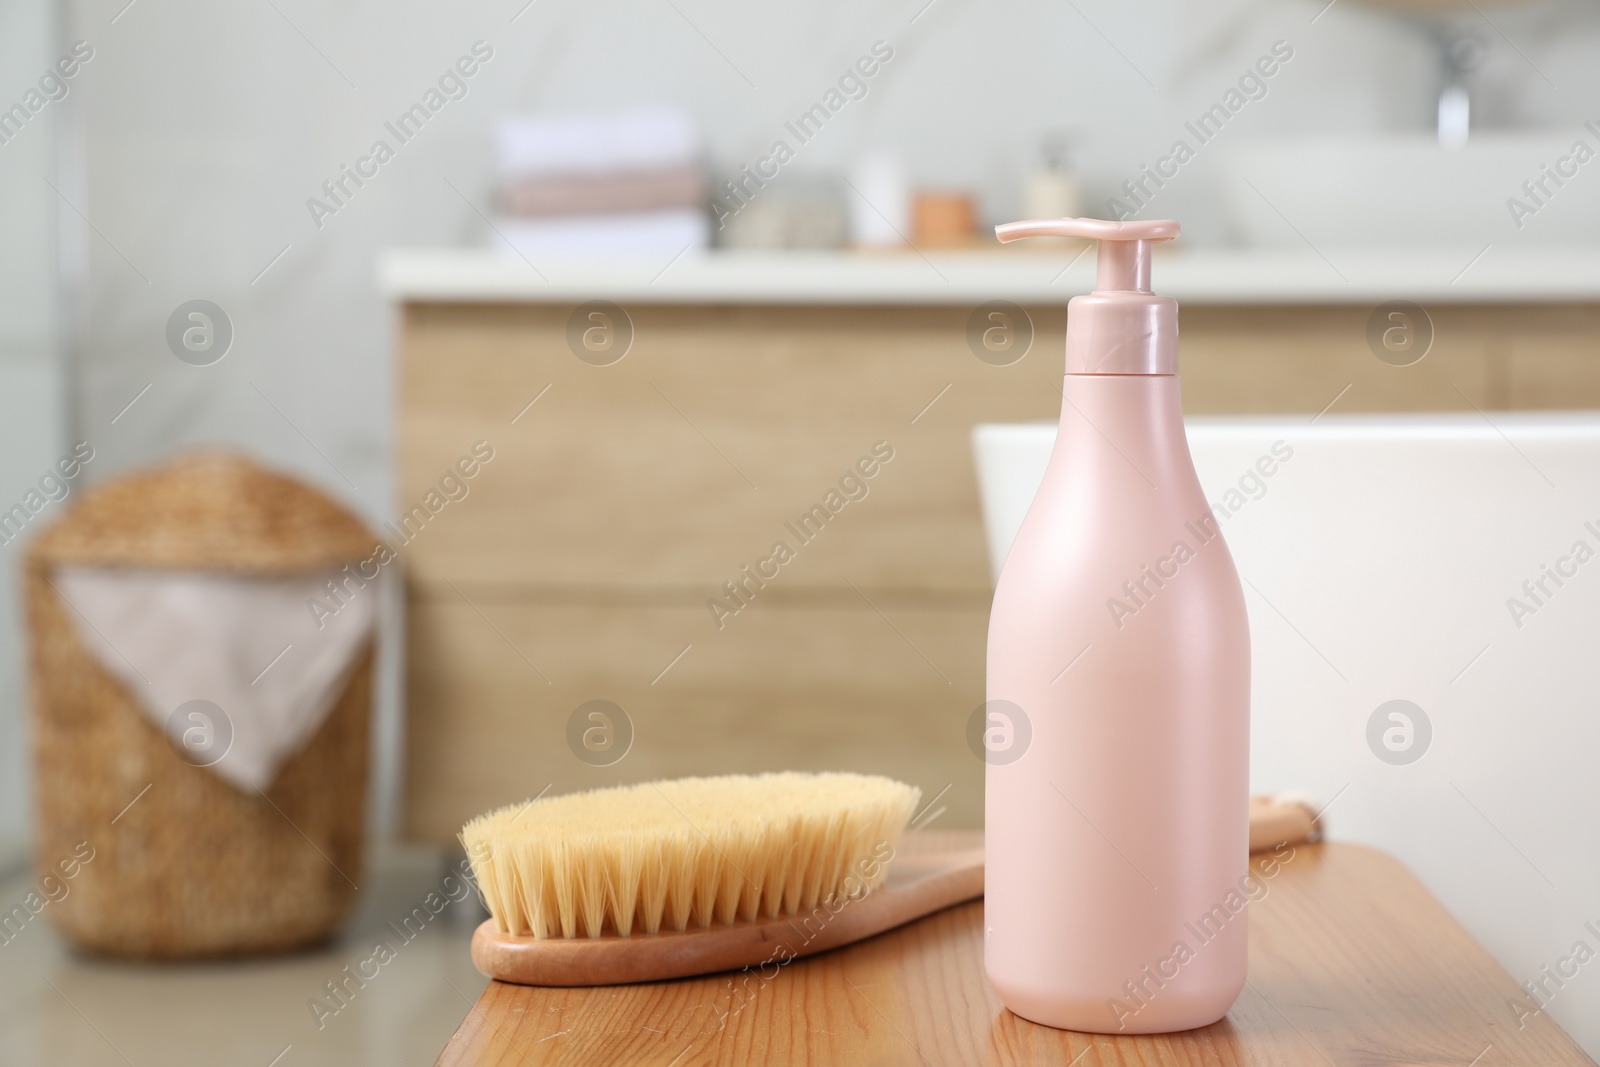 Photo of Bottle of shower gel and brush on wooden table near tub in bathroom, space for text